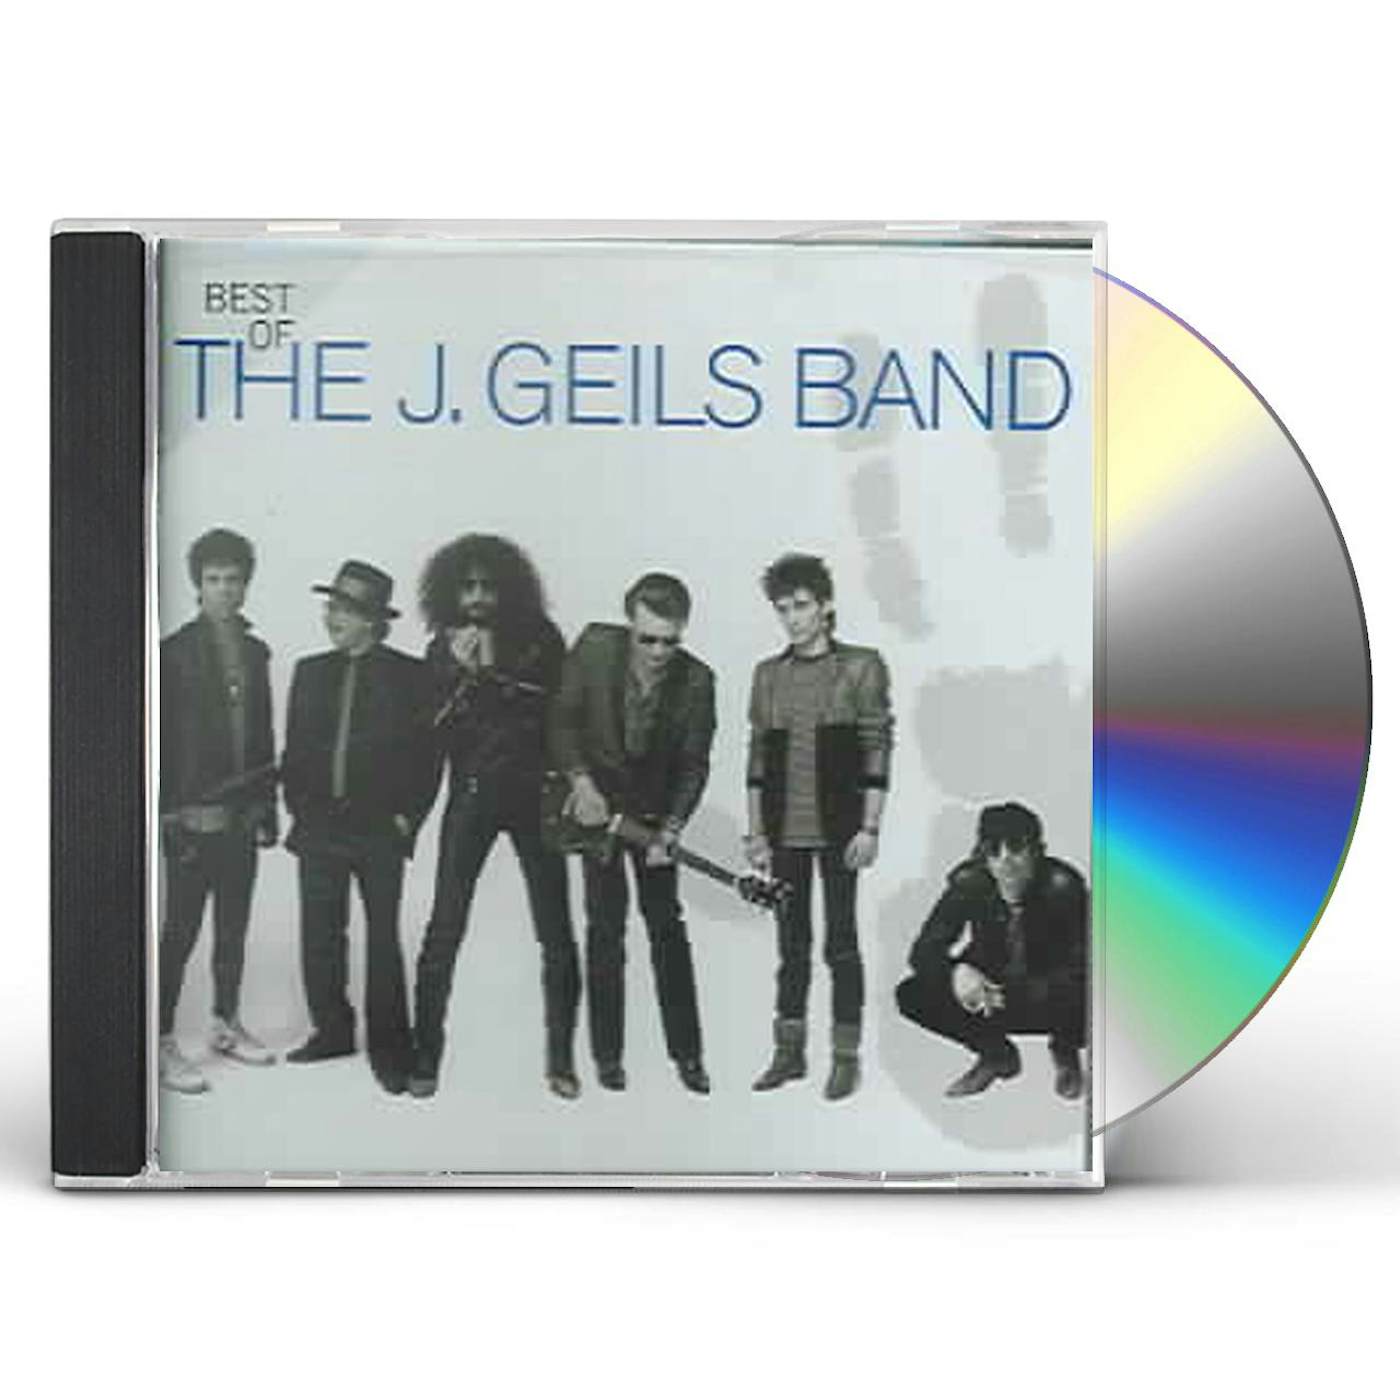 Best Of The J. Geils Band CD